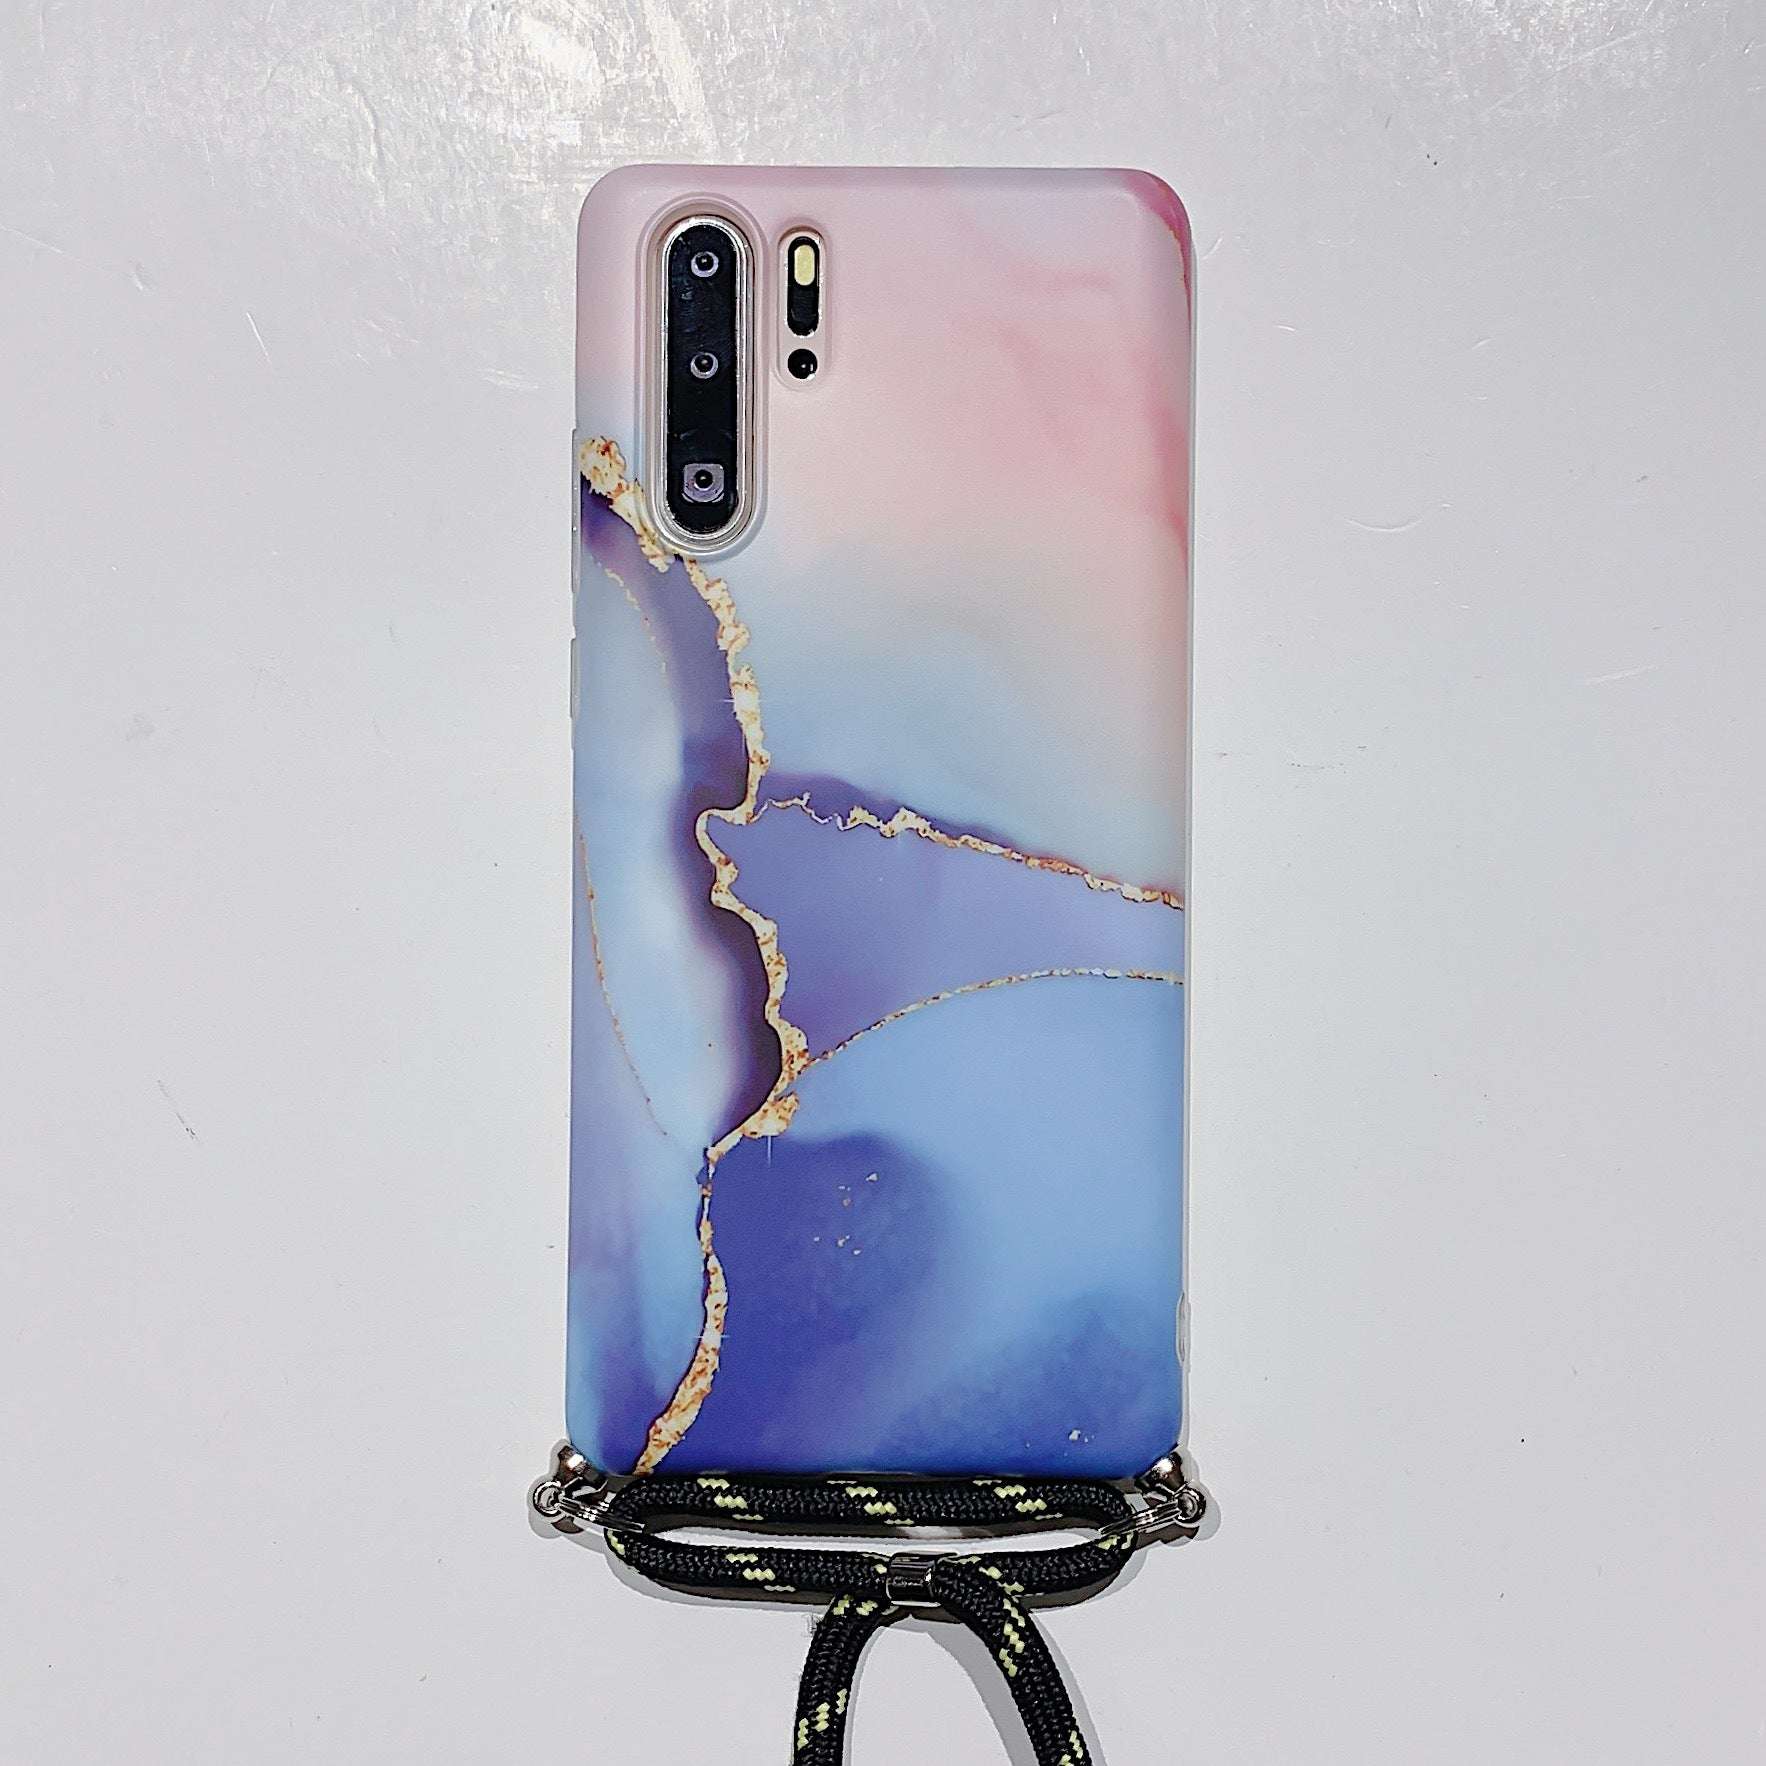 Marble hanging rope, mobile phone case - available at Sparq Mart